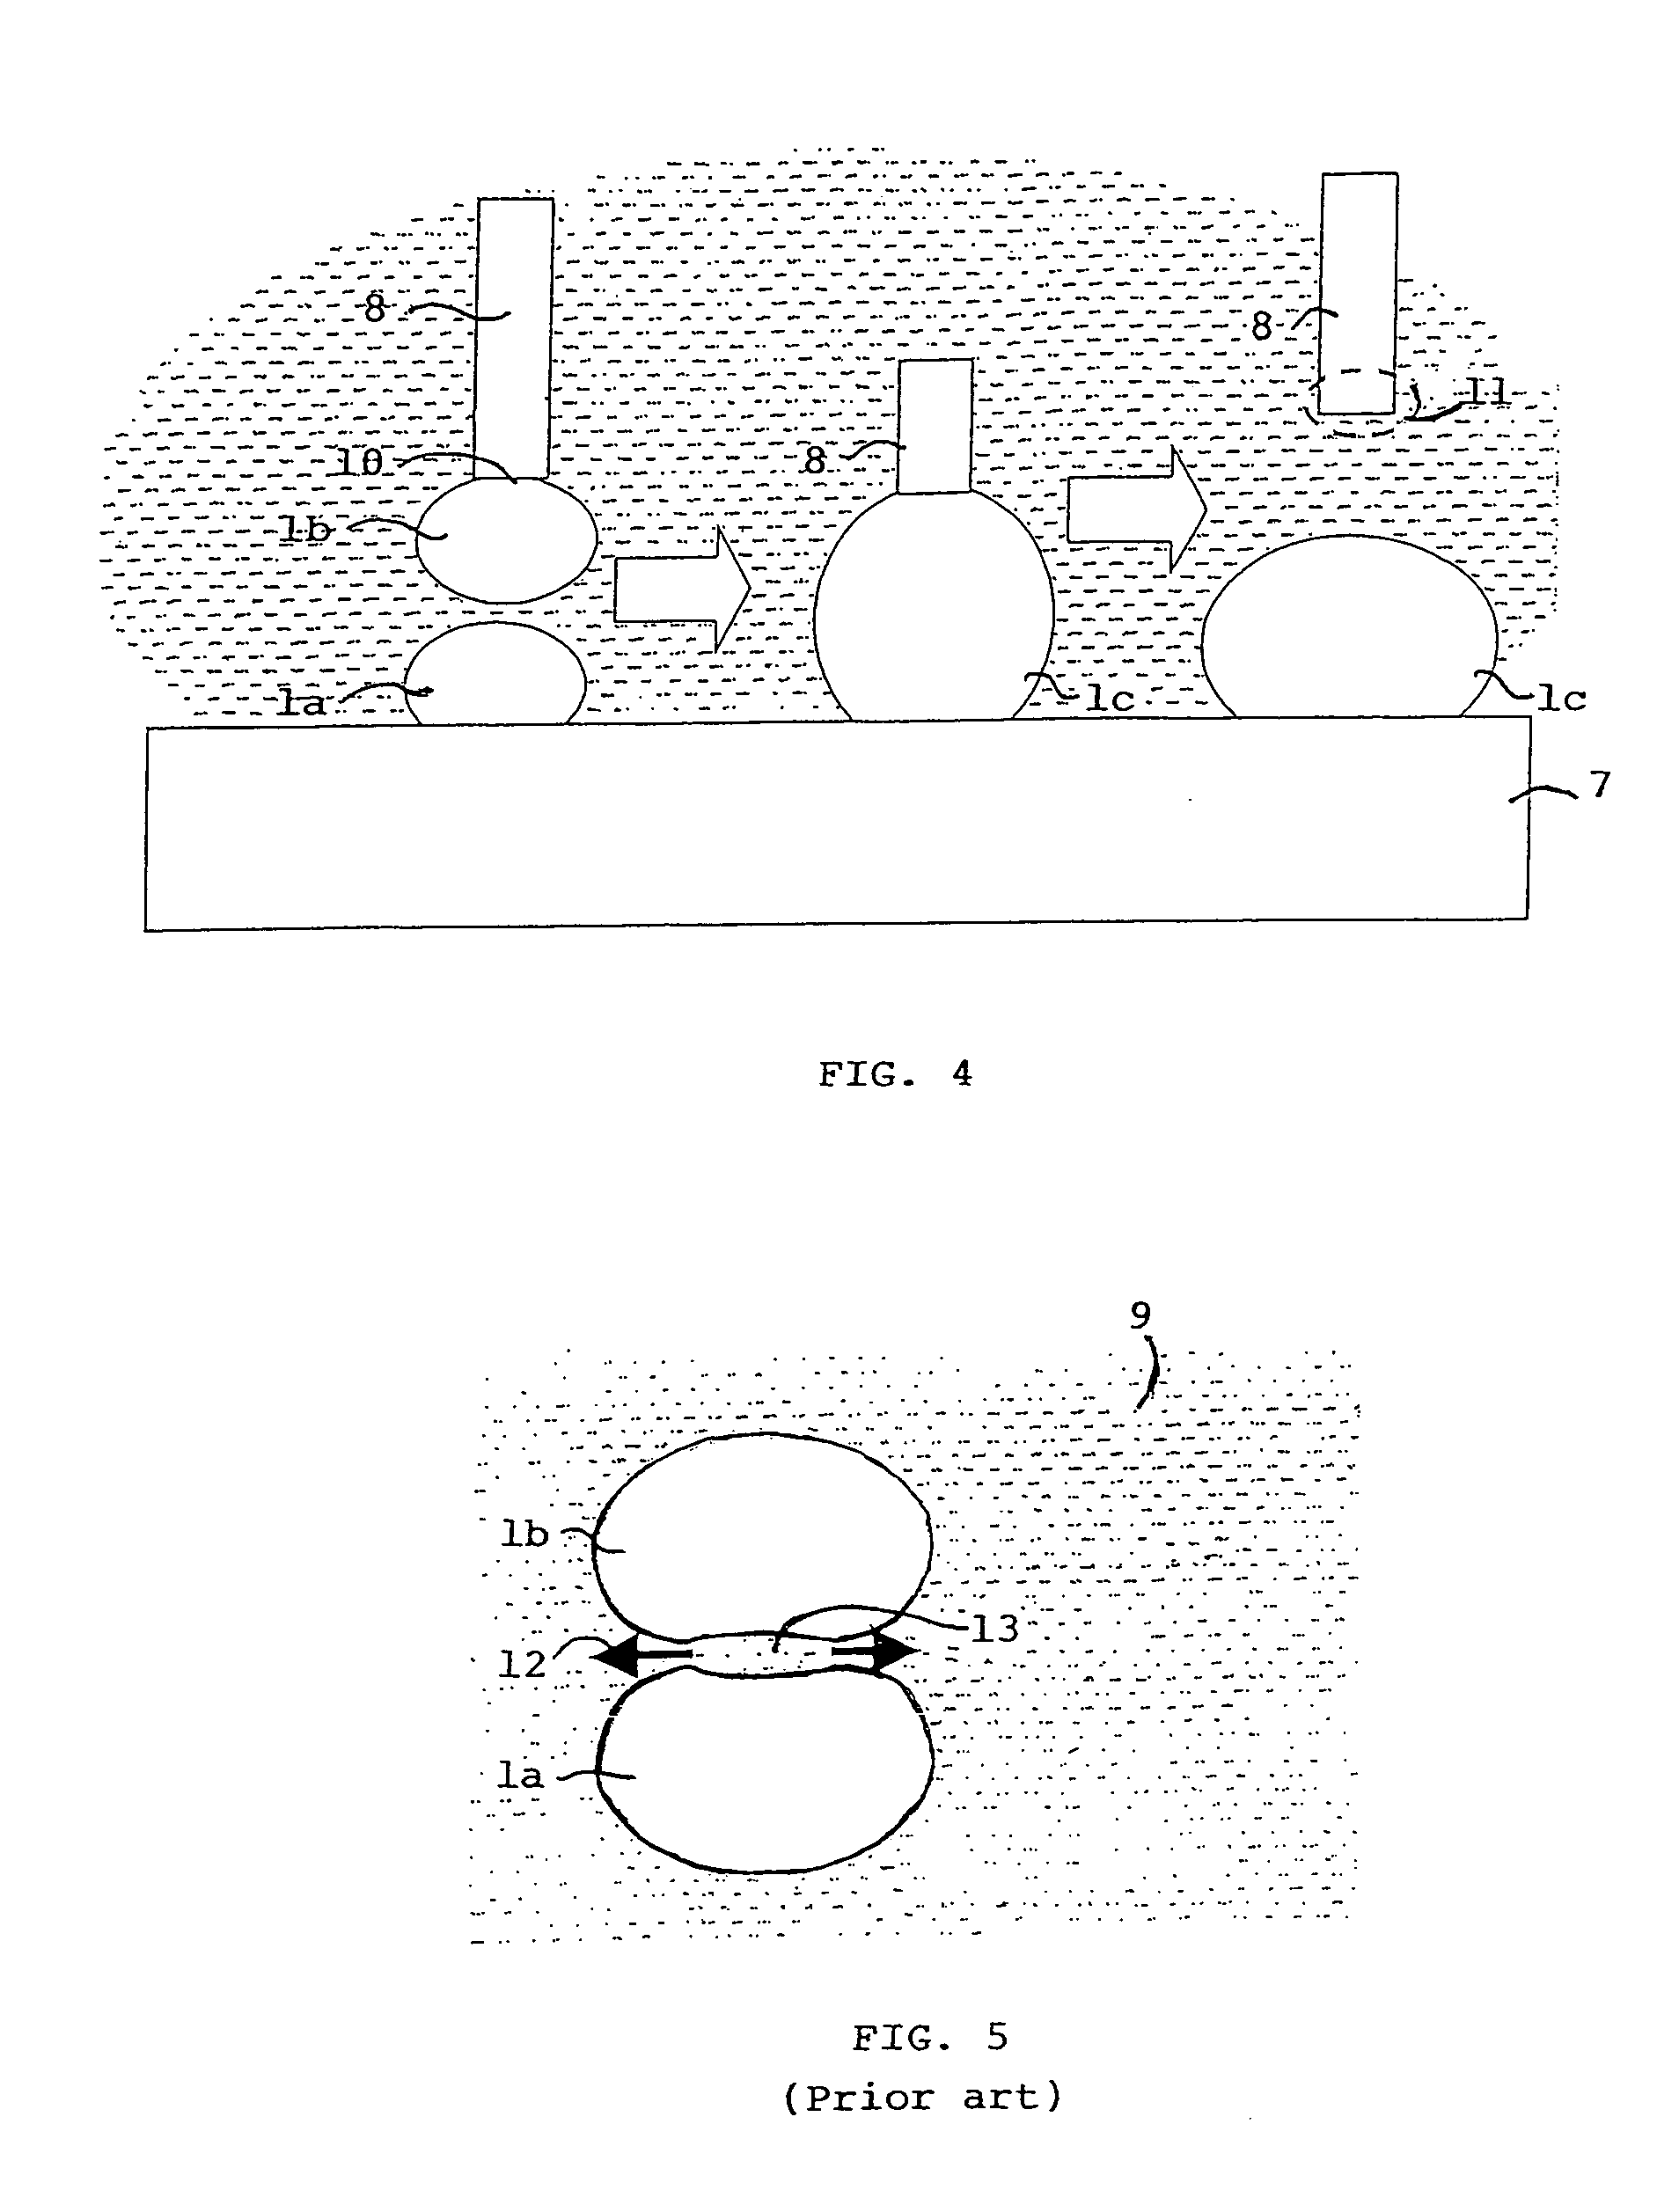 Device for injection and mixing of liquid droplets